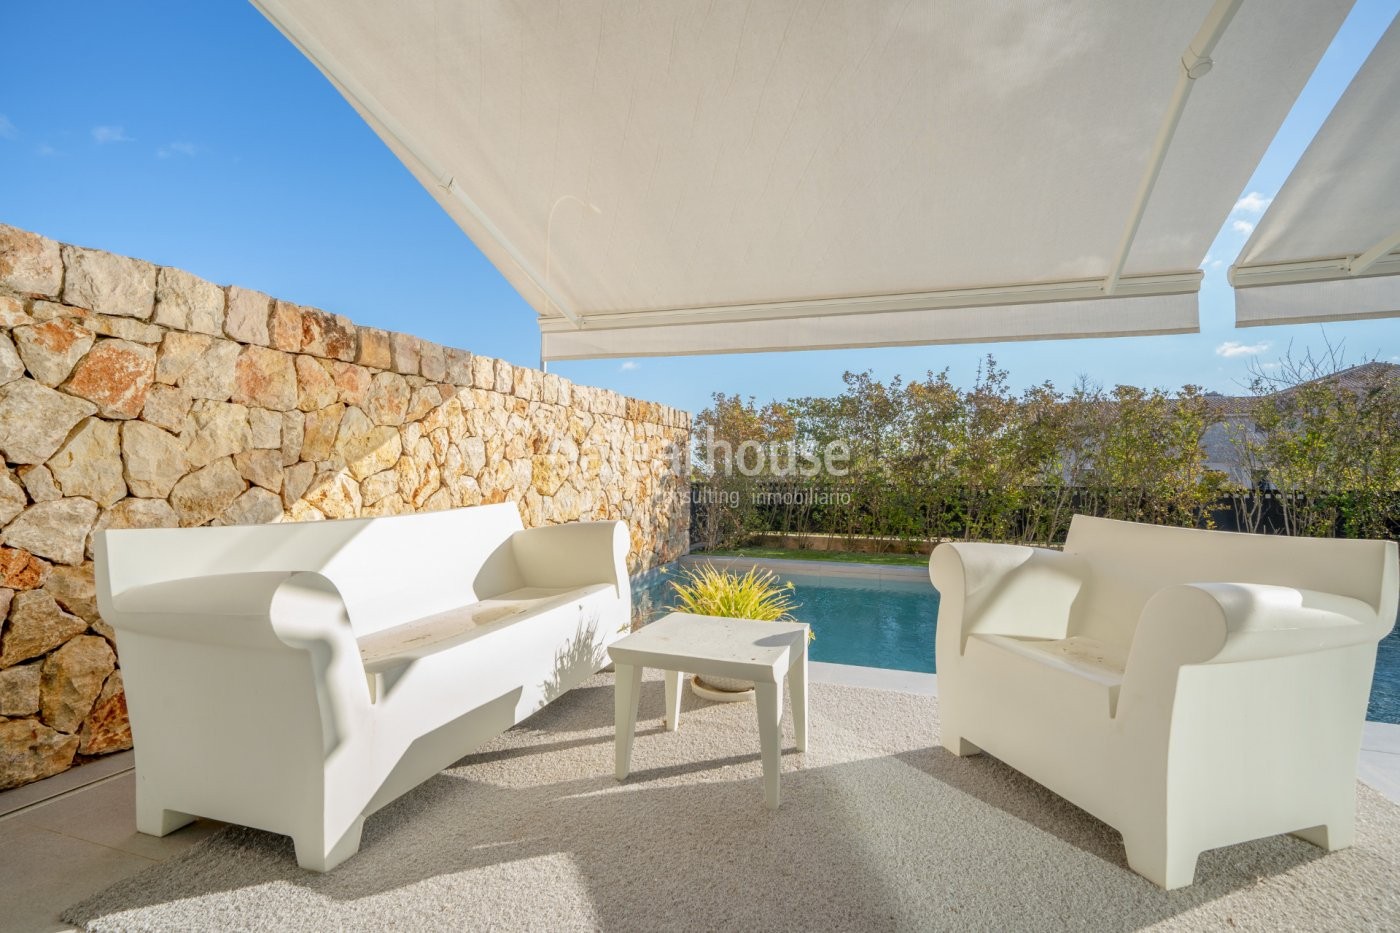 Bright and modern villa with garden and swimming pool located in a green area of Palma.